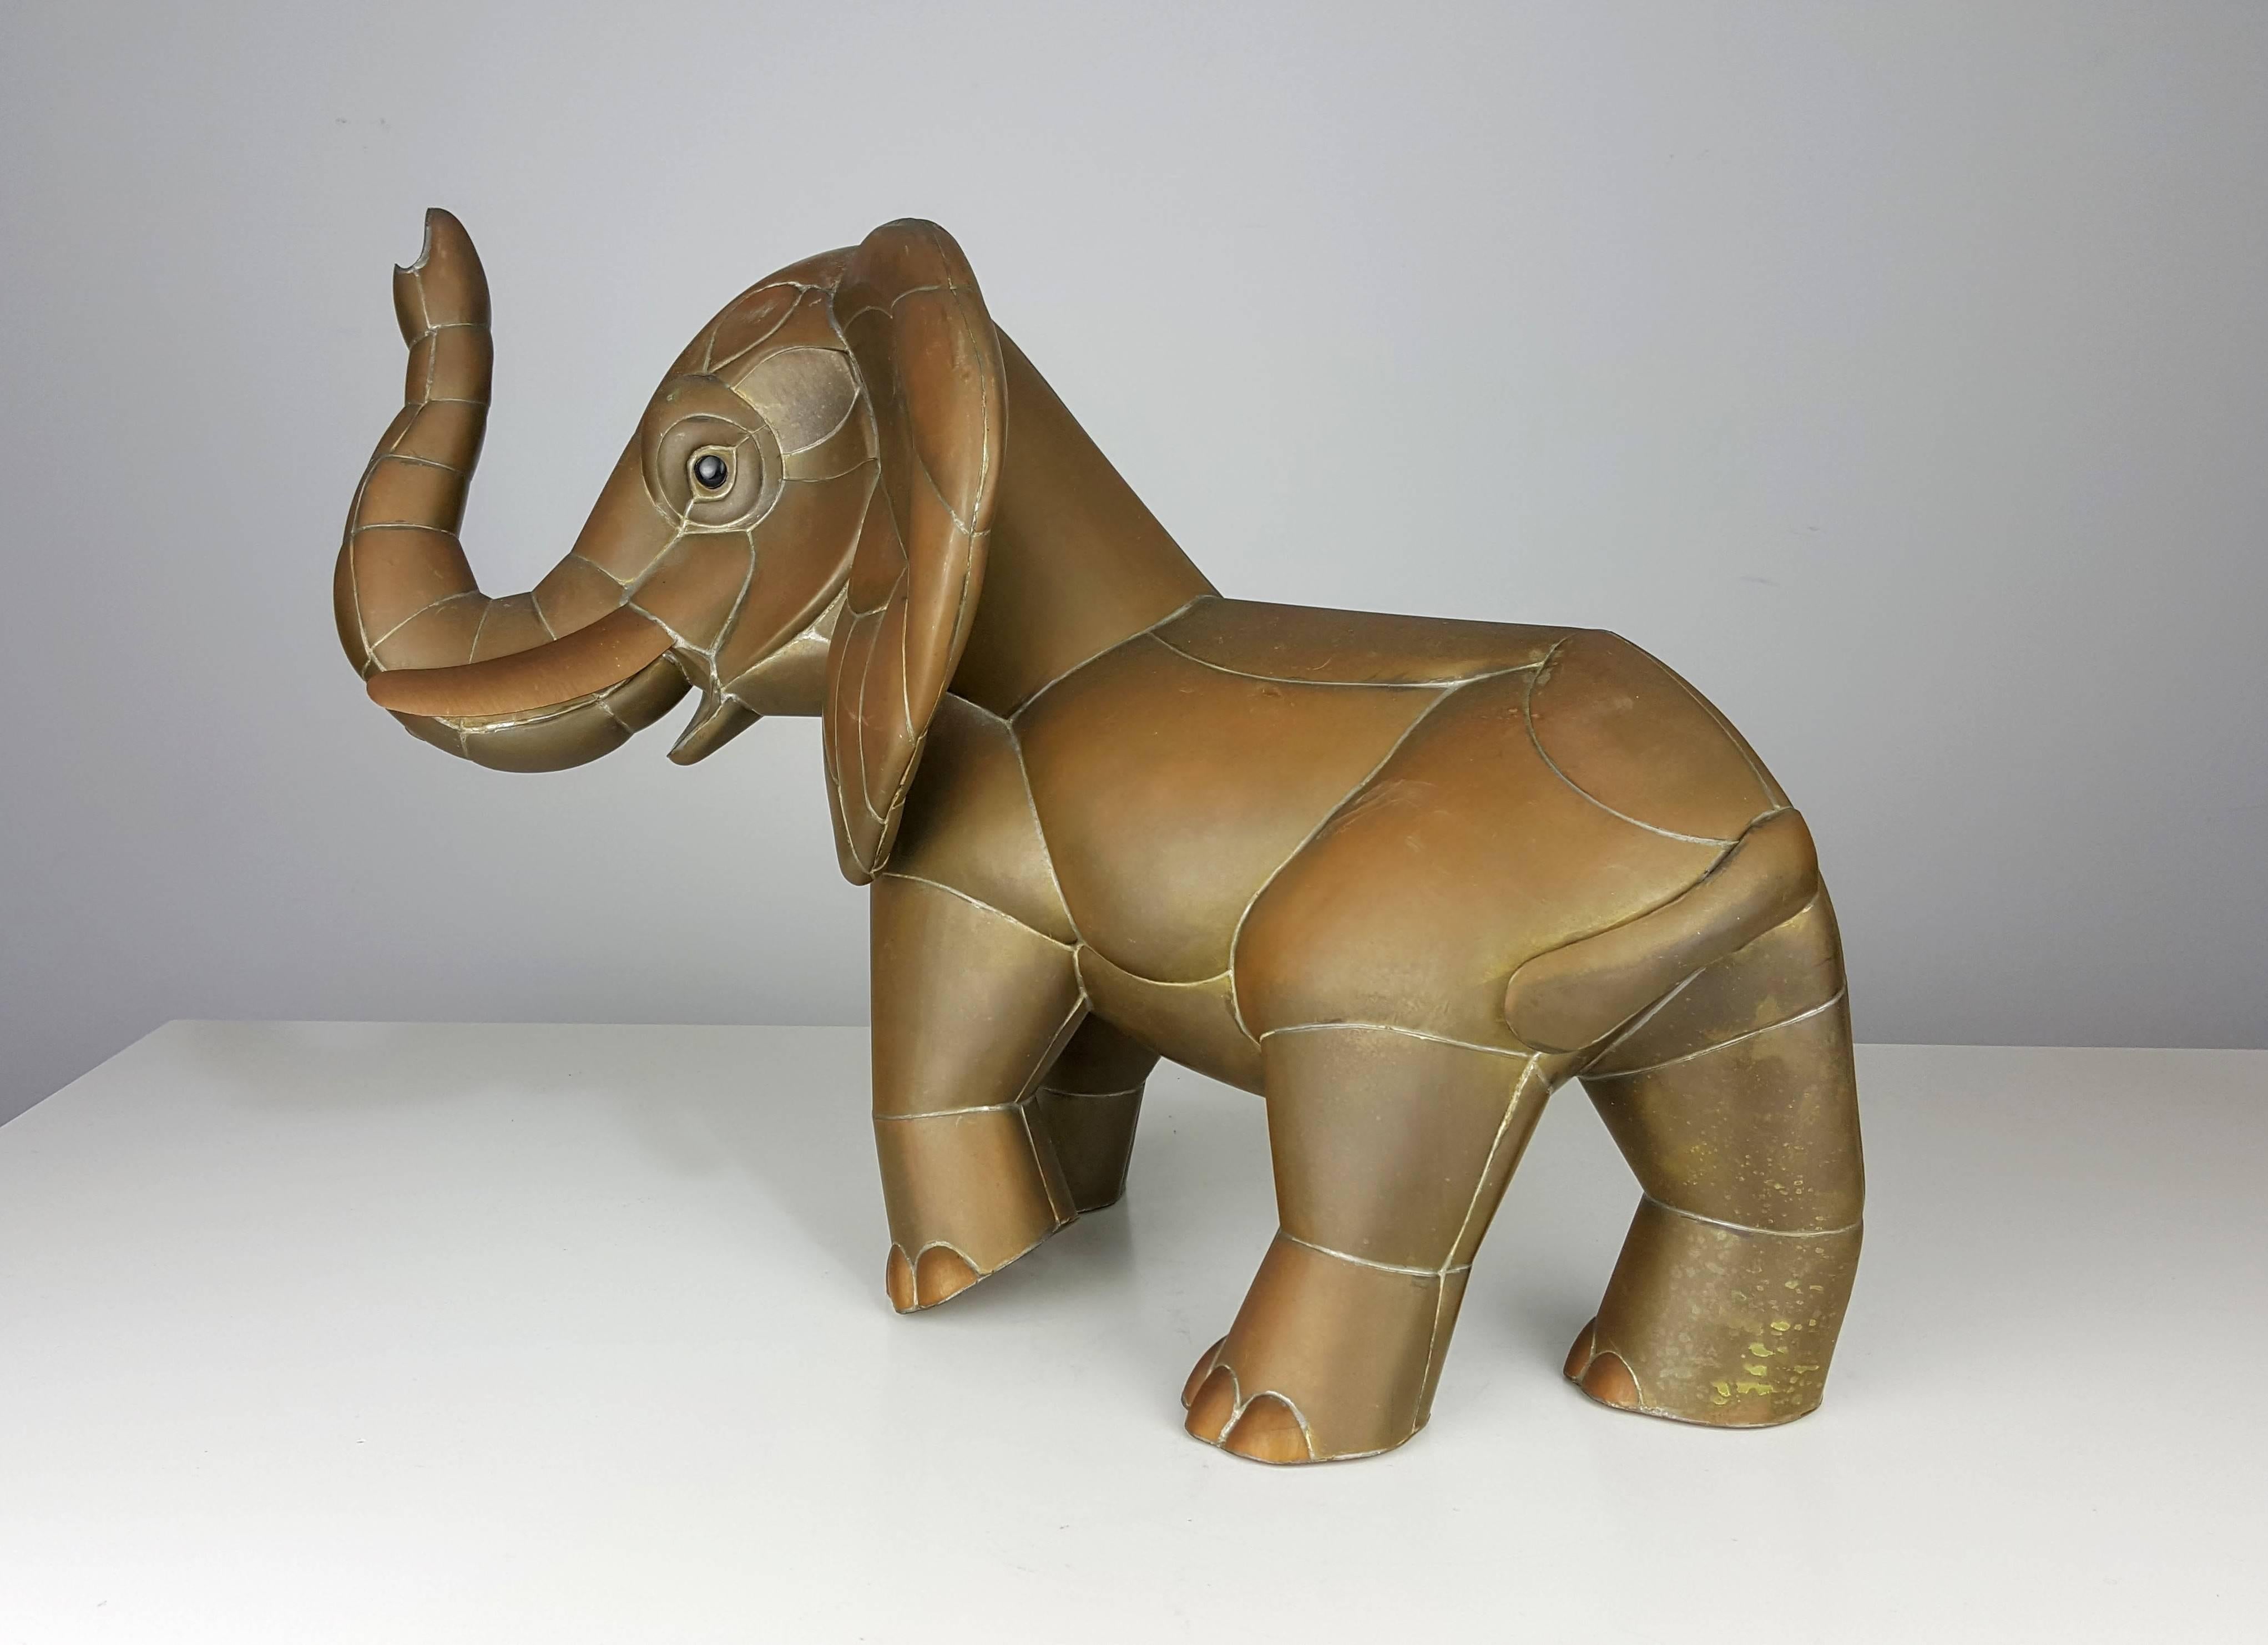 Fancy brass and copper elephant sculpture by Sergio Bustamante, Mexico. Exceptional craftsmanship and detail with a beautiful antique patina. Excellent condition. This piece is unsigned.

See this item in our private NYC showroom! Refine Limited